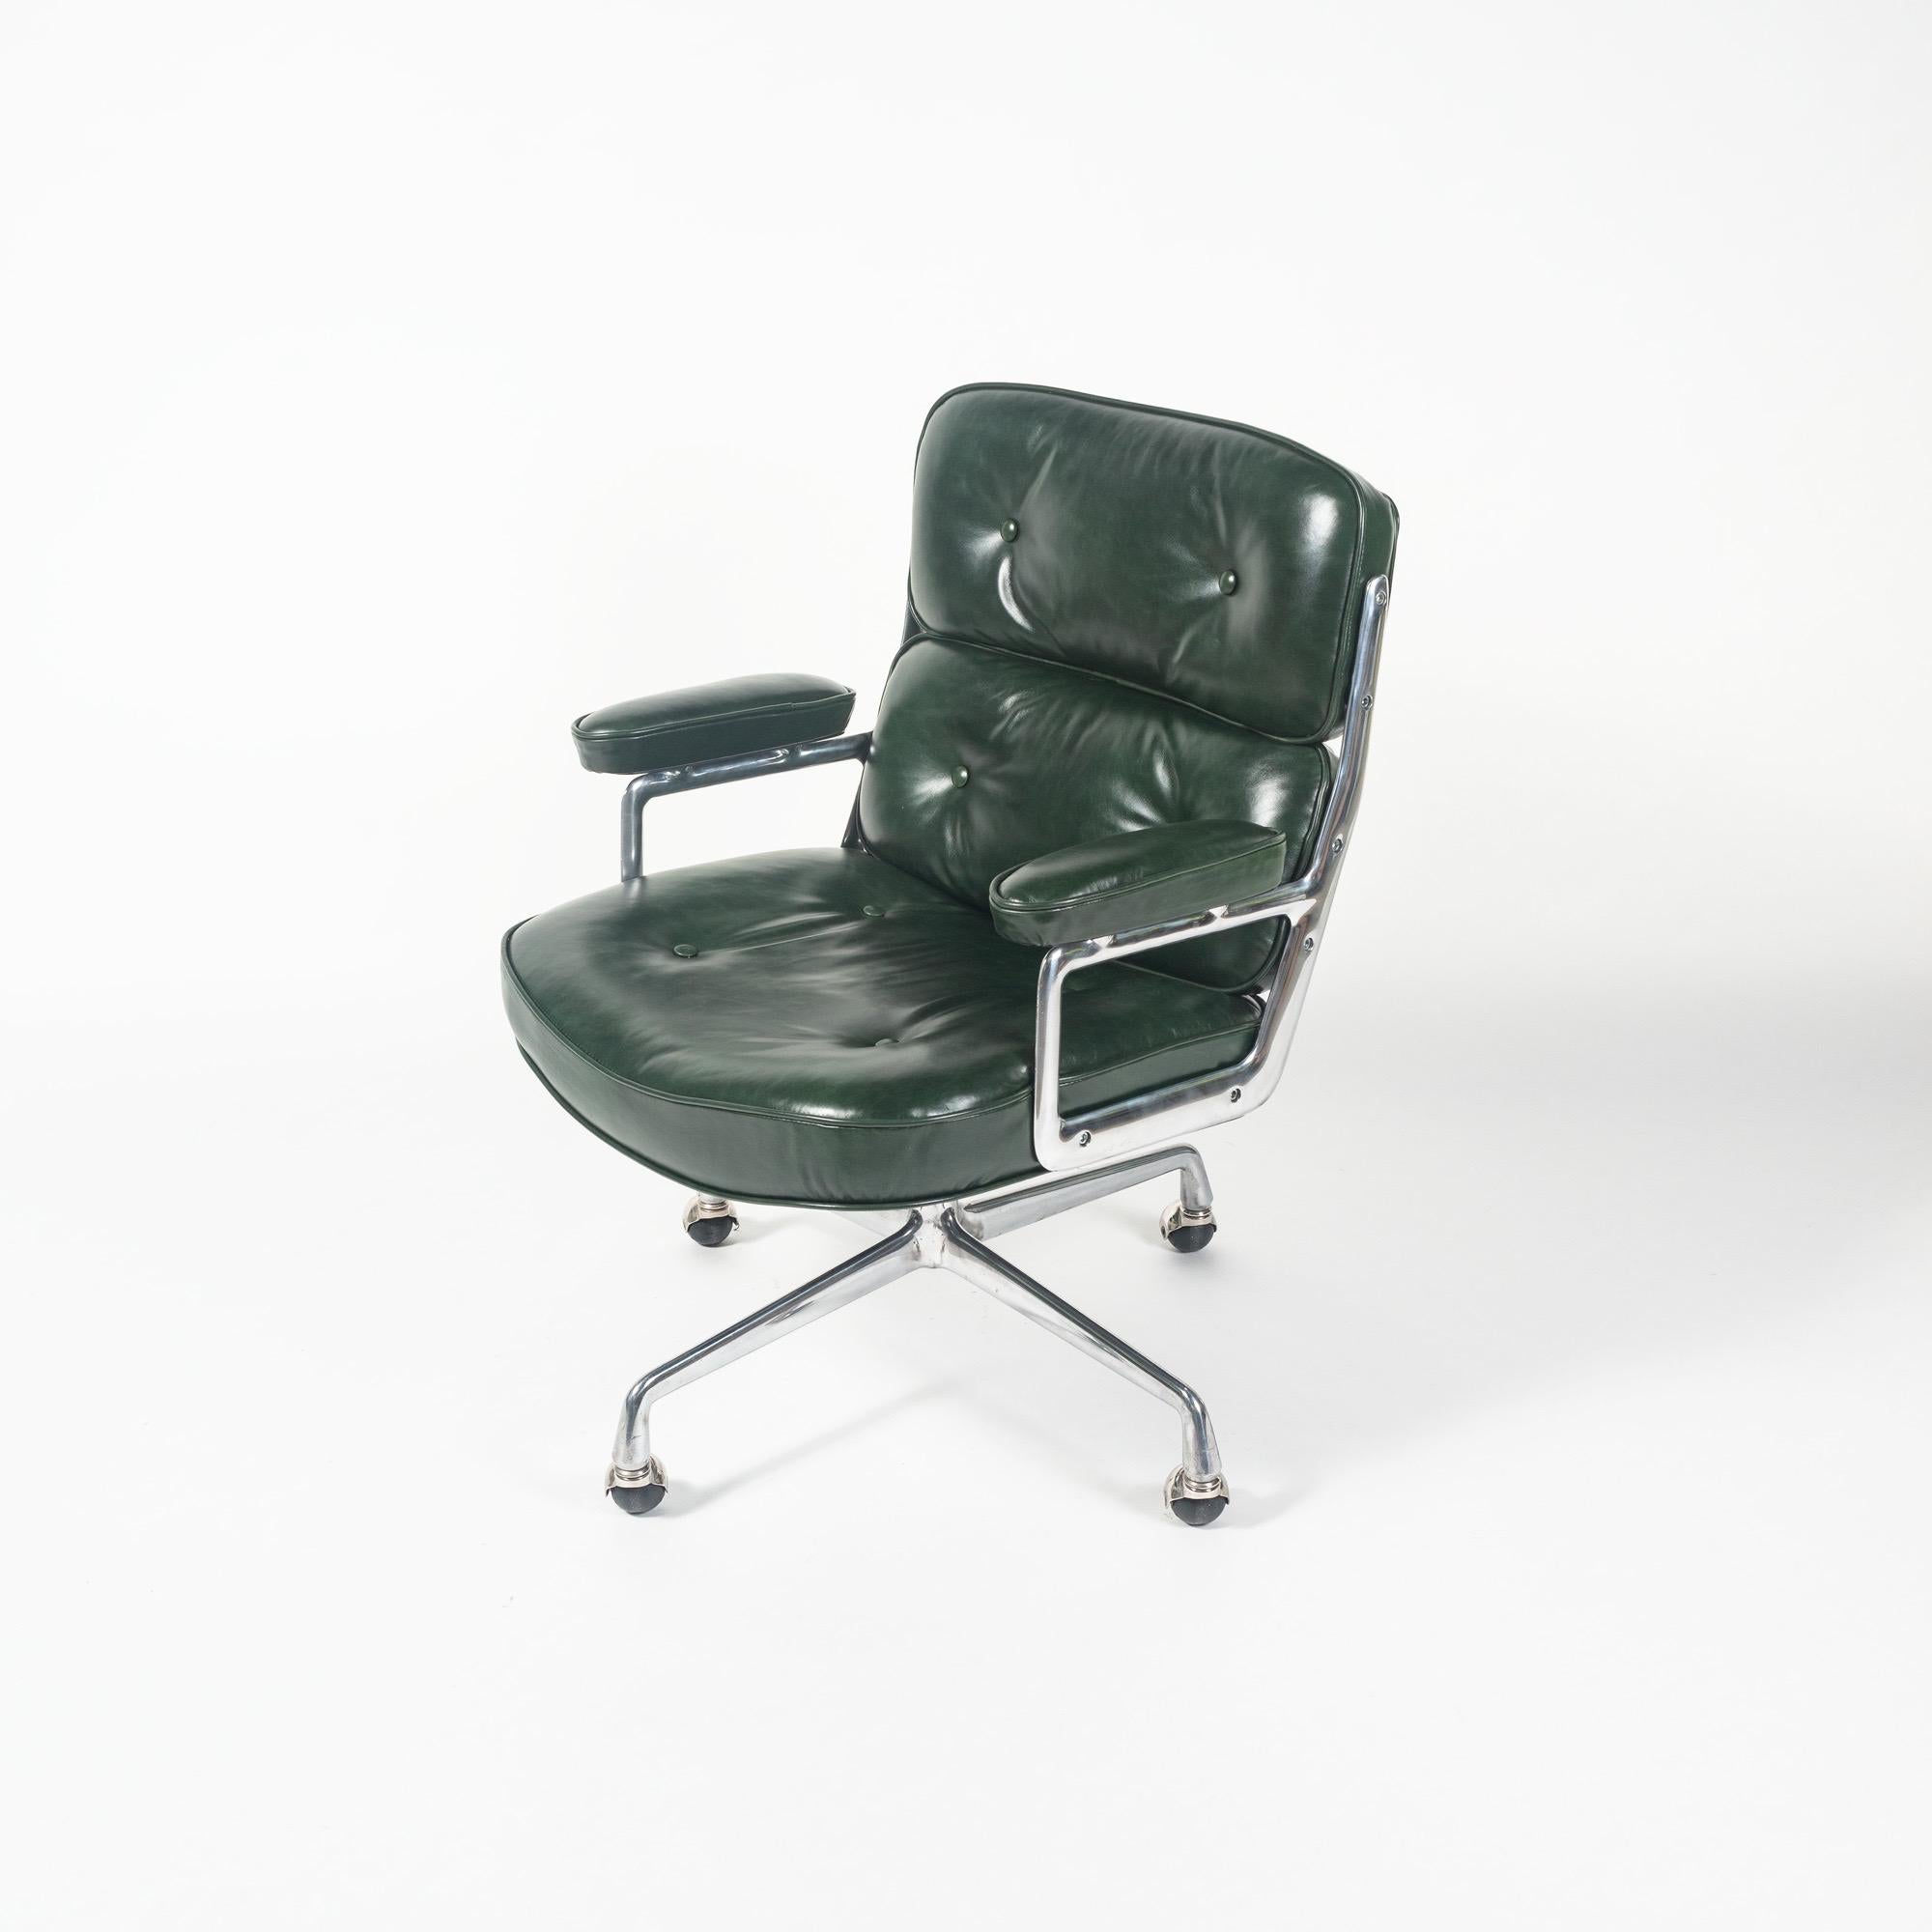 North American First Gen Eames Time Life Lobby Chair in British Racing Green